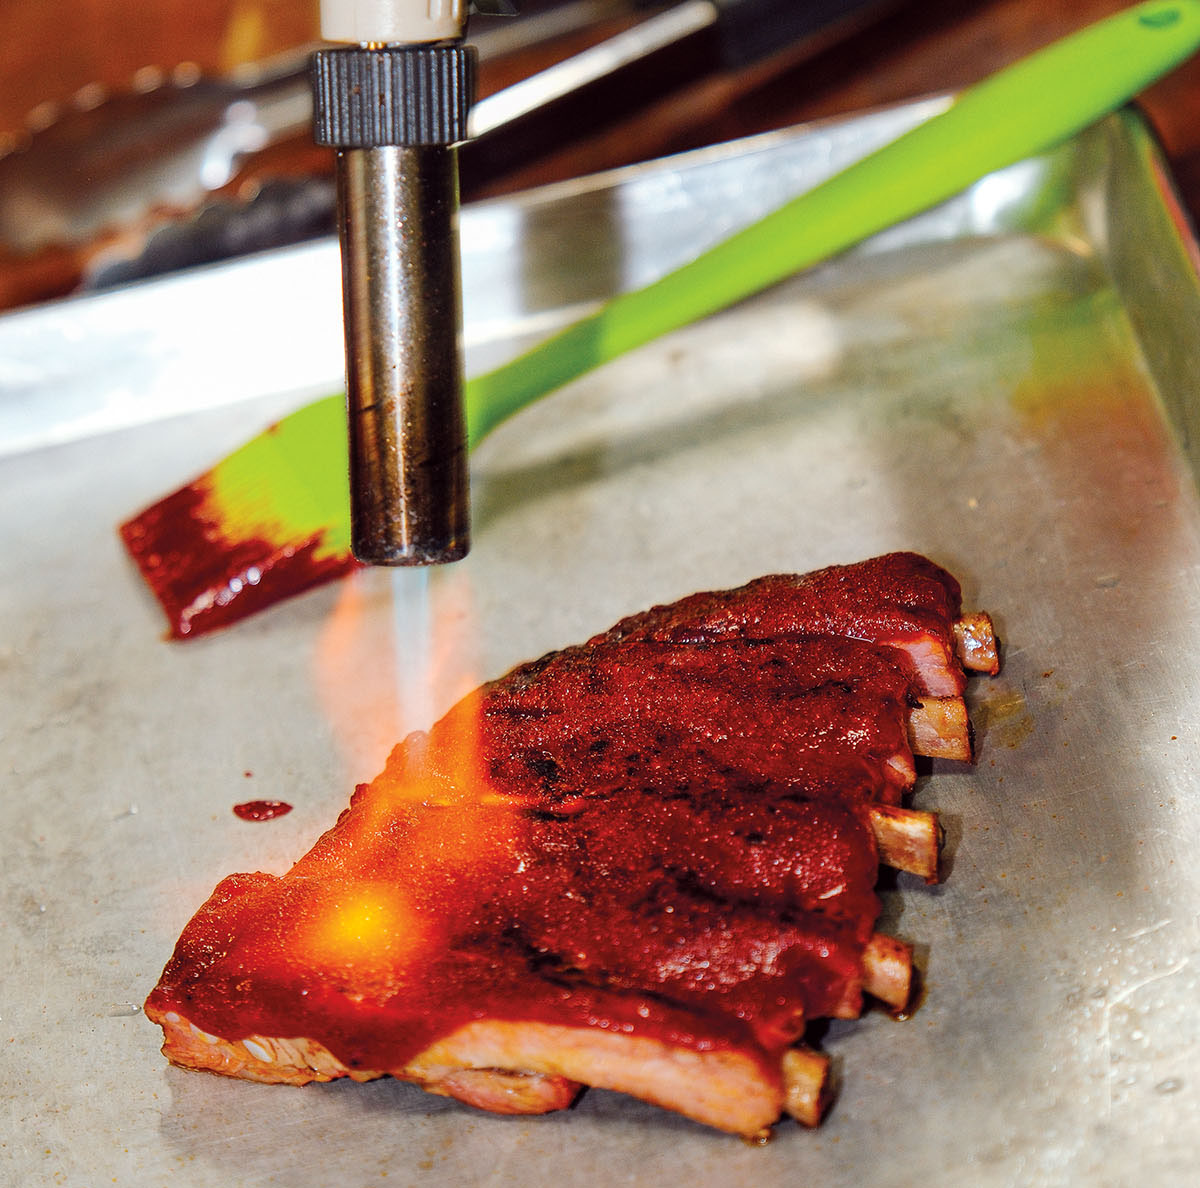 A silver blowtorch is used to apply a flame to a bright red rack of ribs